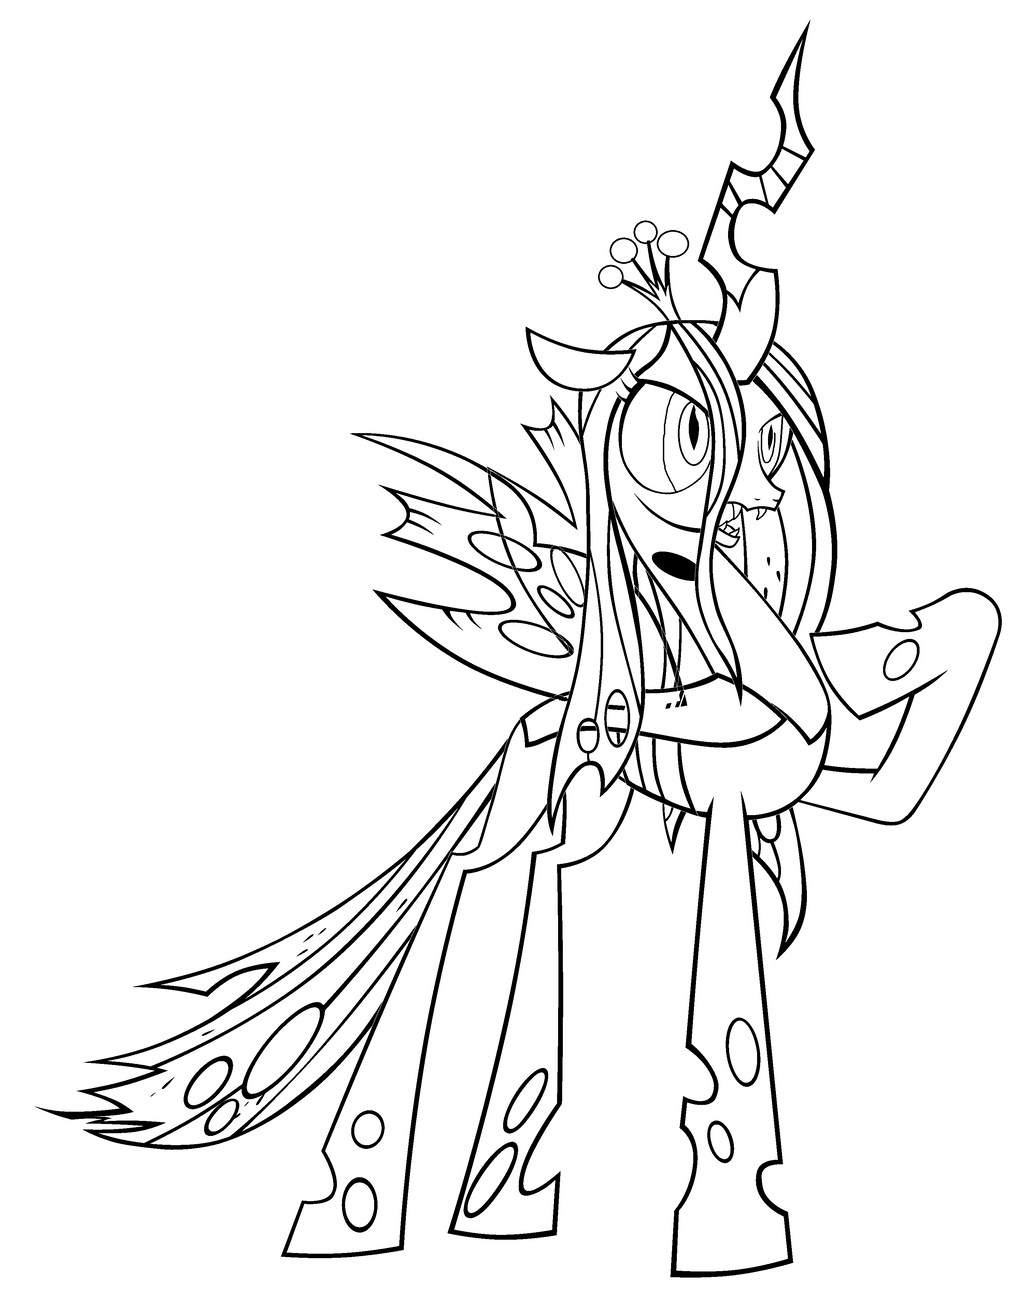 queen chrysalis and fluffle puff coloring pages - photo #41